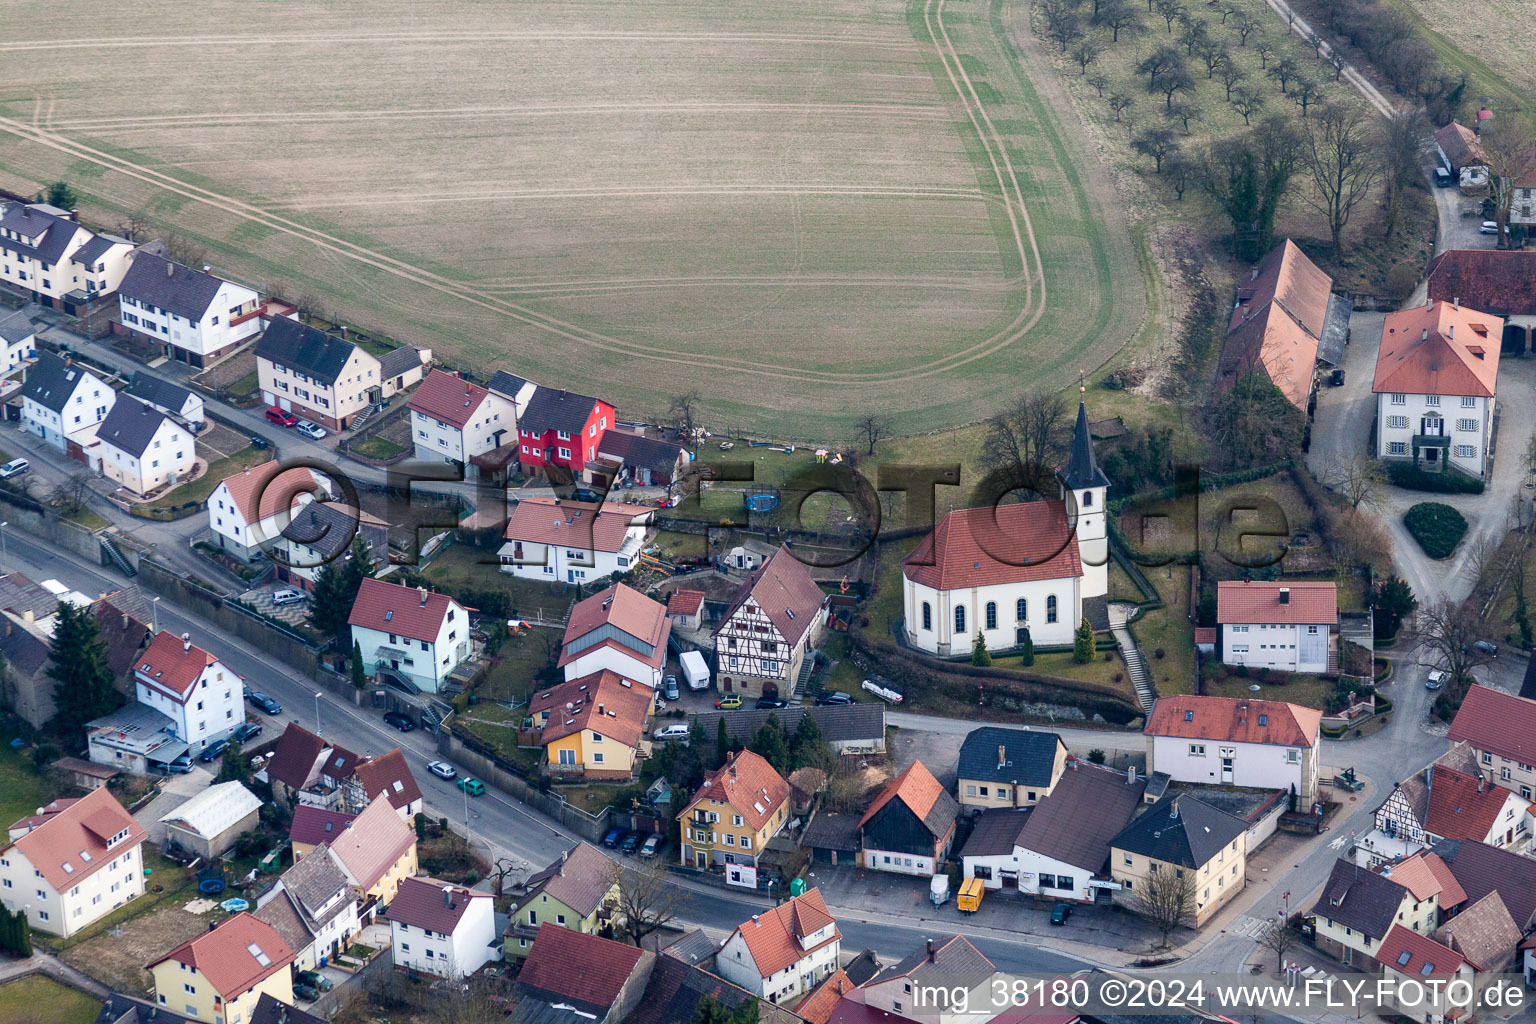 Aerial view of Church building in the village of in the district Obergimpern in Bad Rappenau in the state Baden-Wurttemberg, Germany